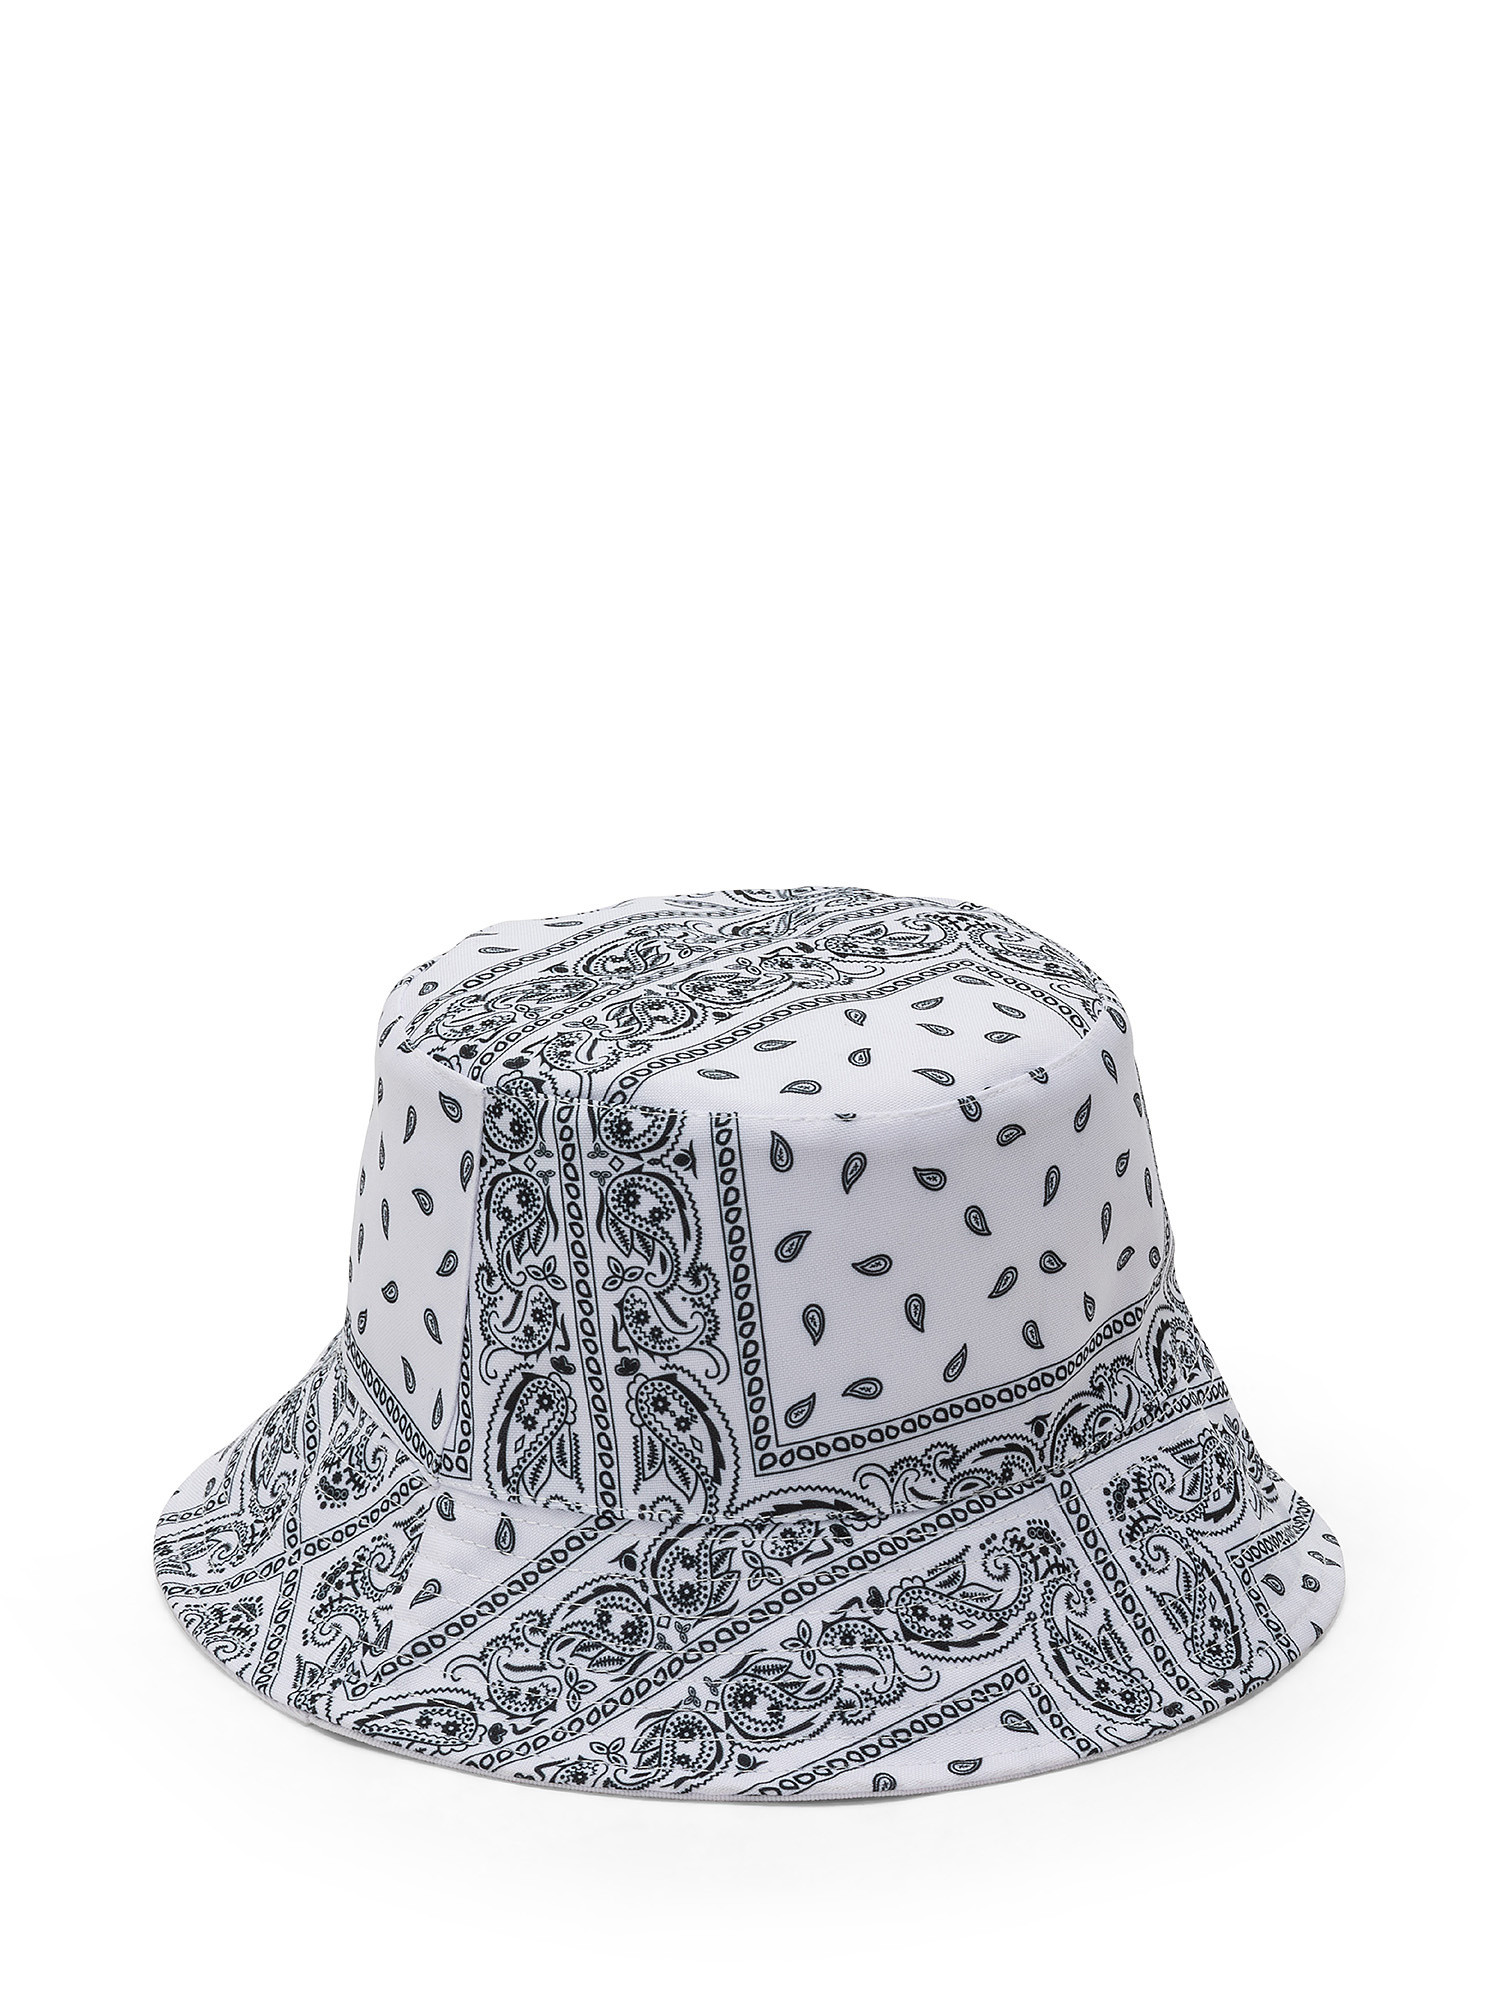 Cappello cloche stampa bandana, Bianco, large image number 0